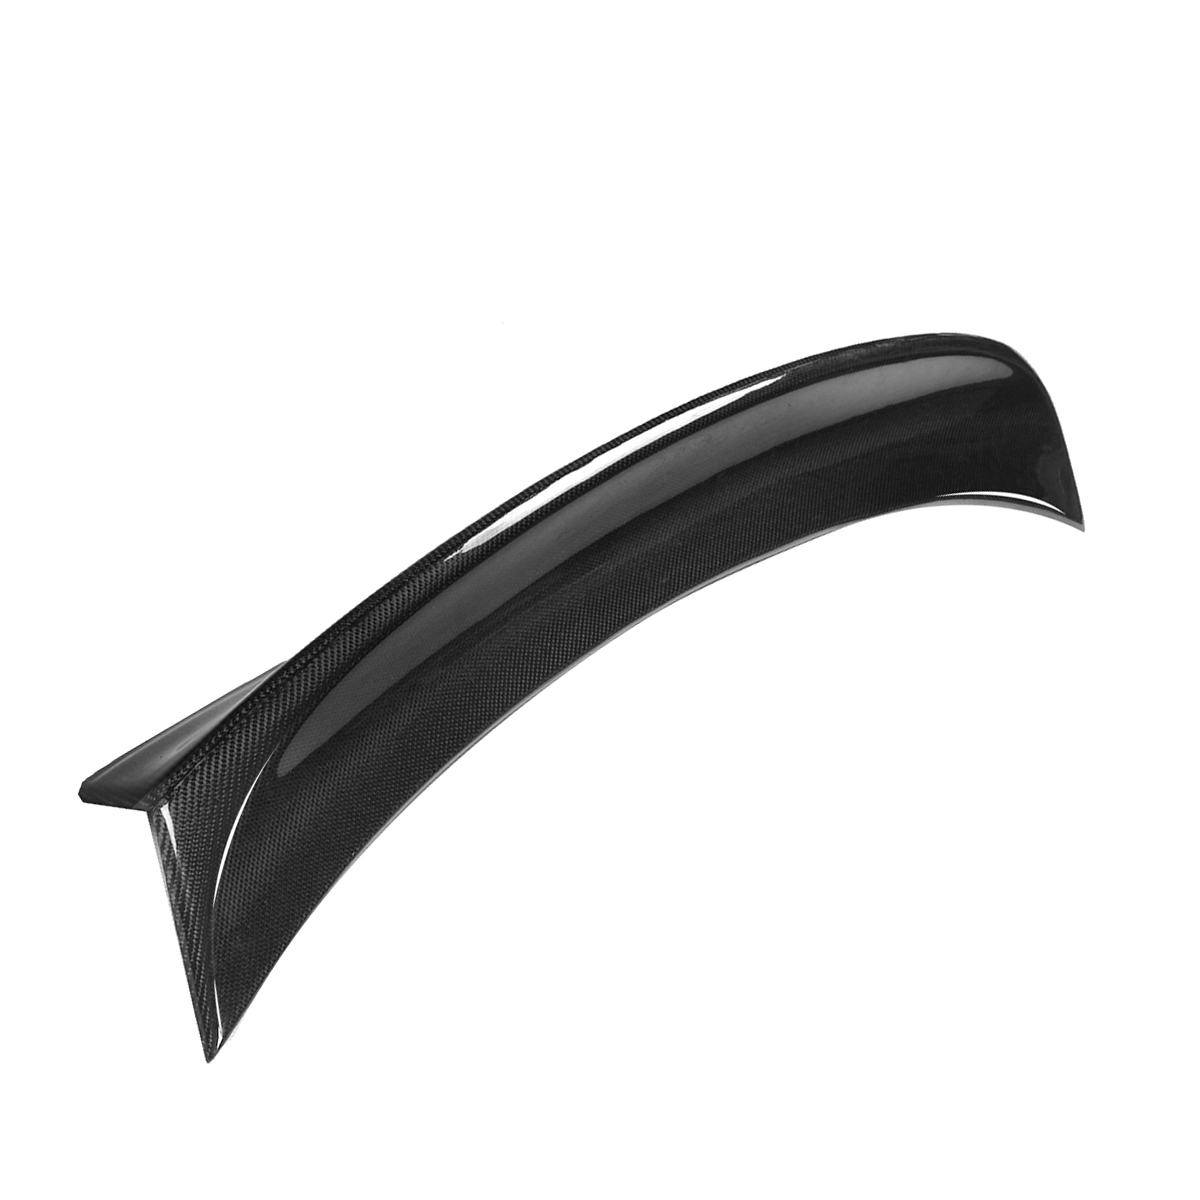 CSL Style Carbon Fiber Trunk Lid Car Spoiler Wing for BMW 2001-06 E46 3 SERIES & M3 COUPE